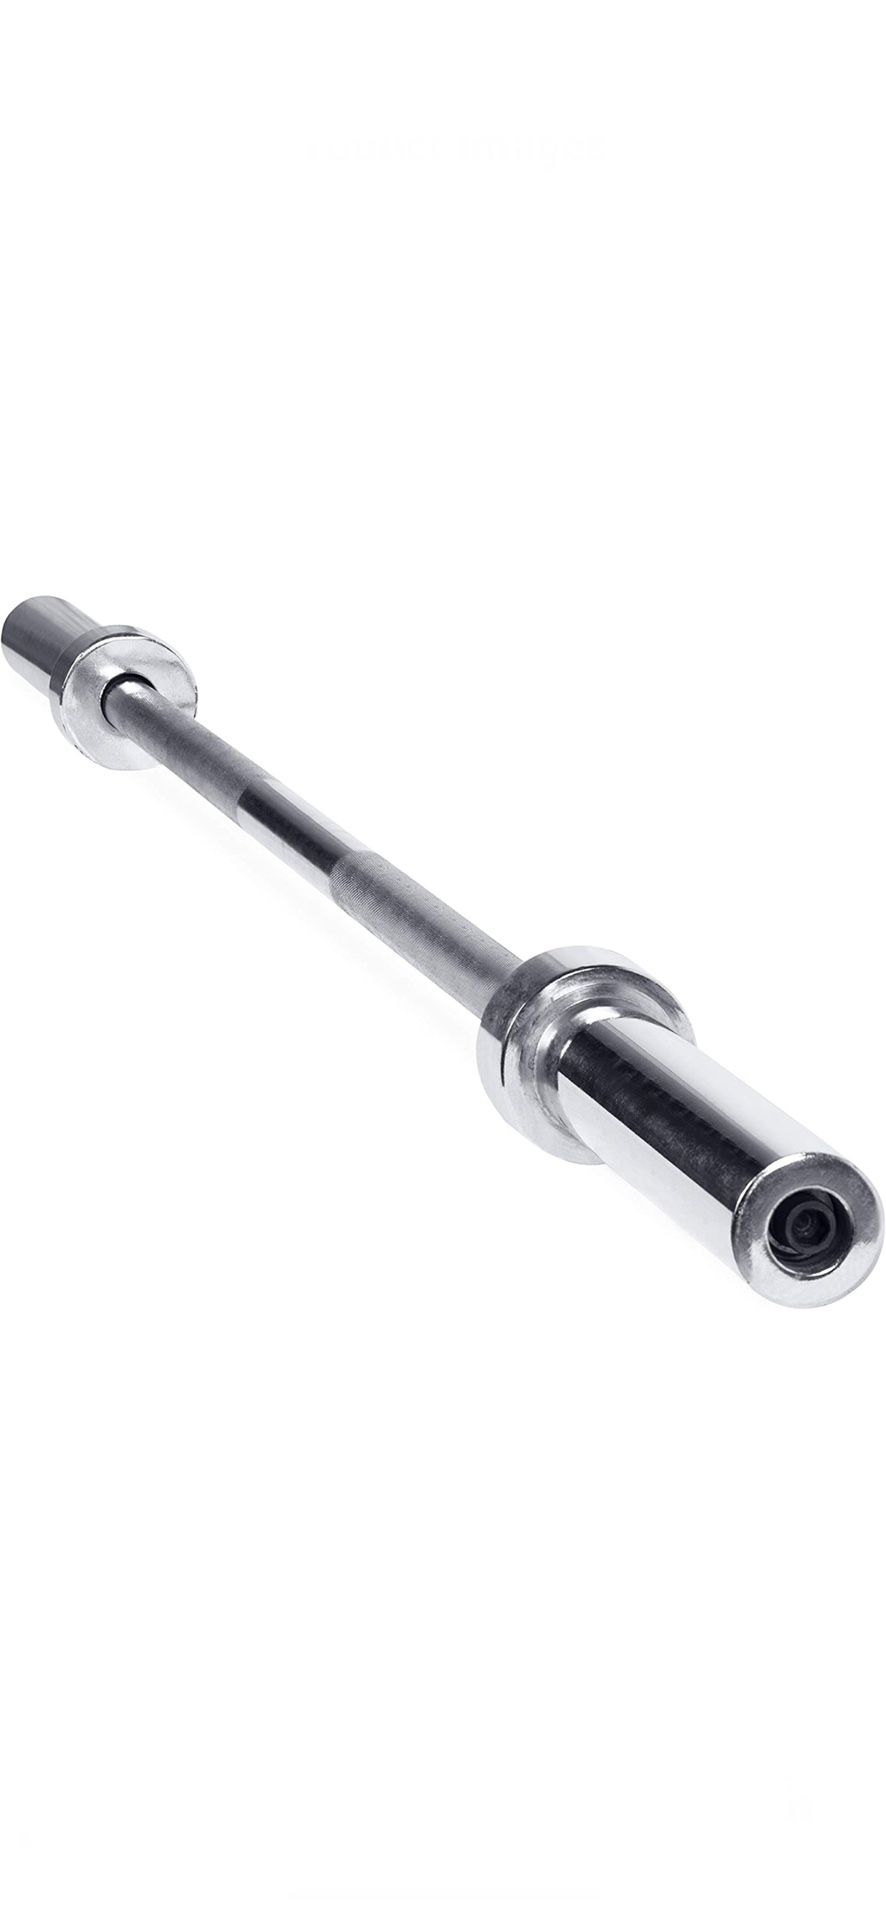 CAP Barbell 5-foot Solid Olympic Bar Chrome 2”